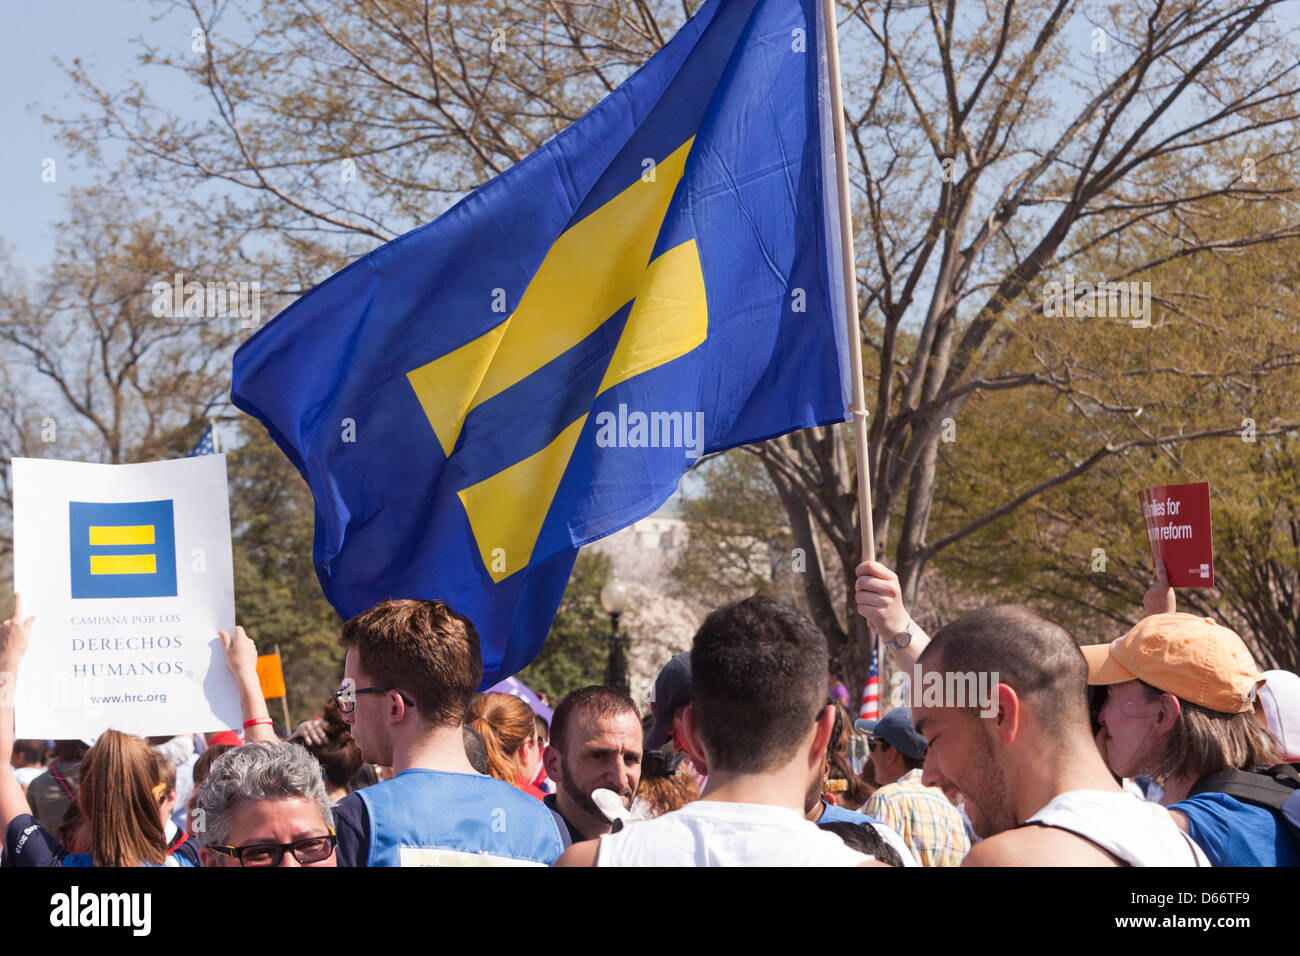 Equality symbol flag in crowd Stock Photo